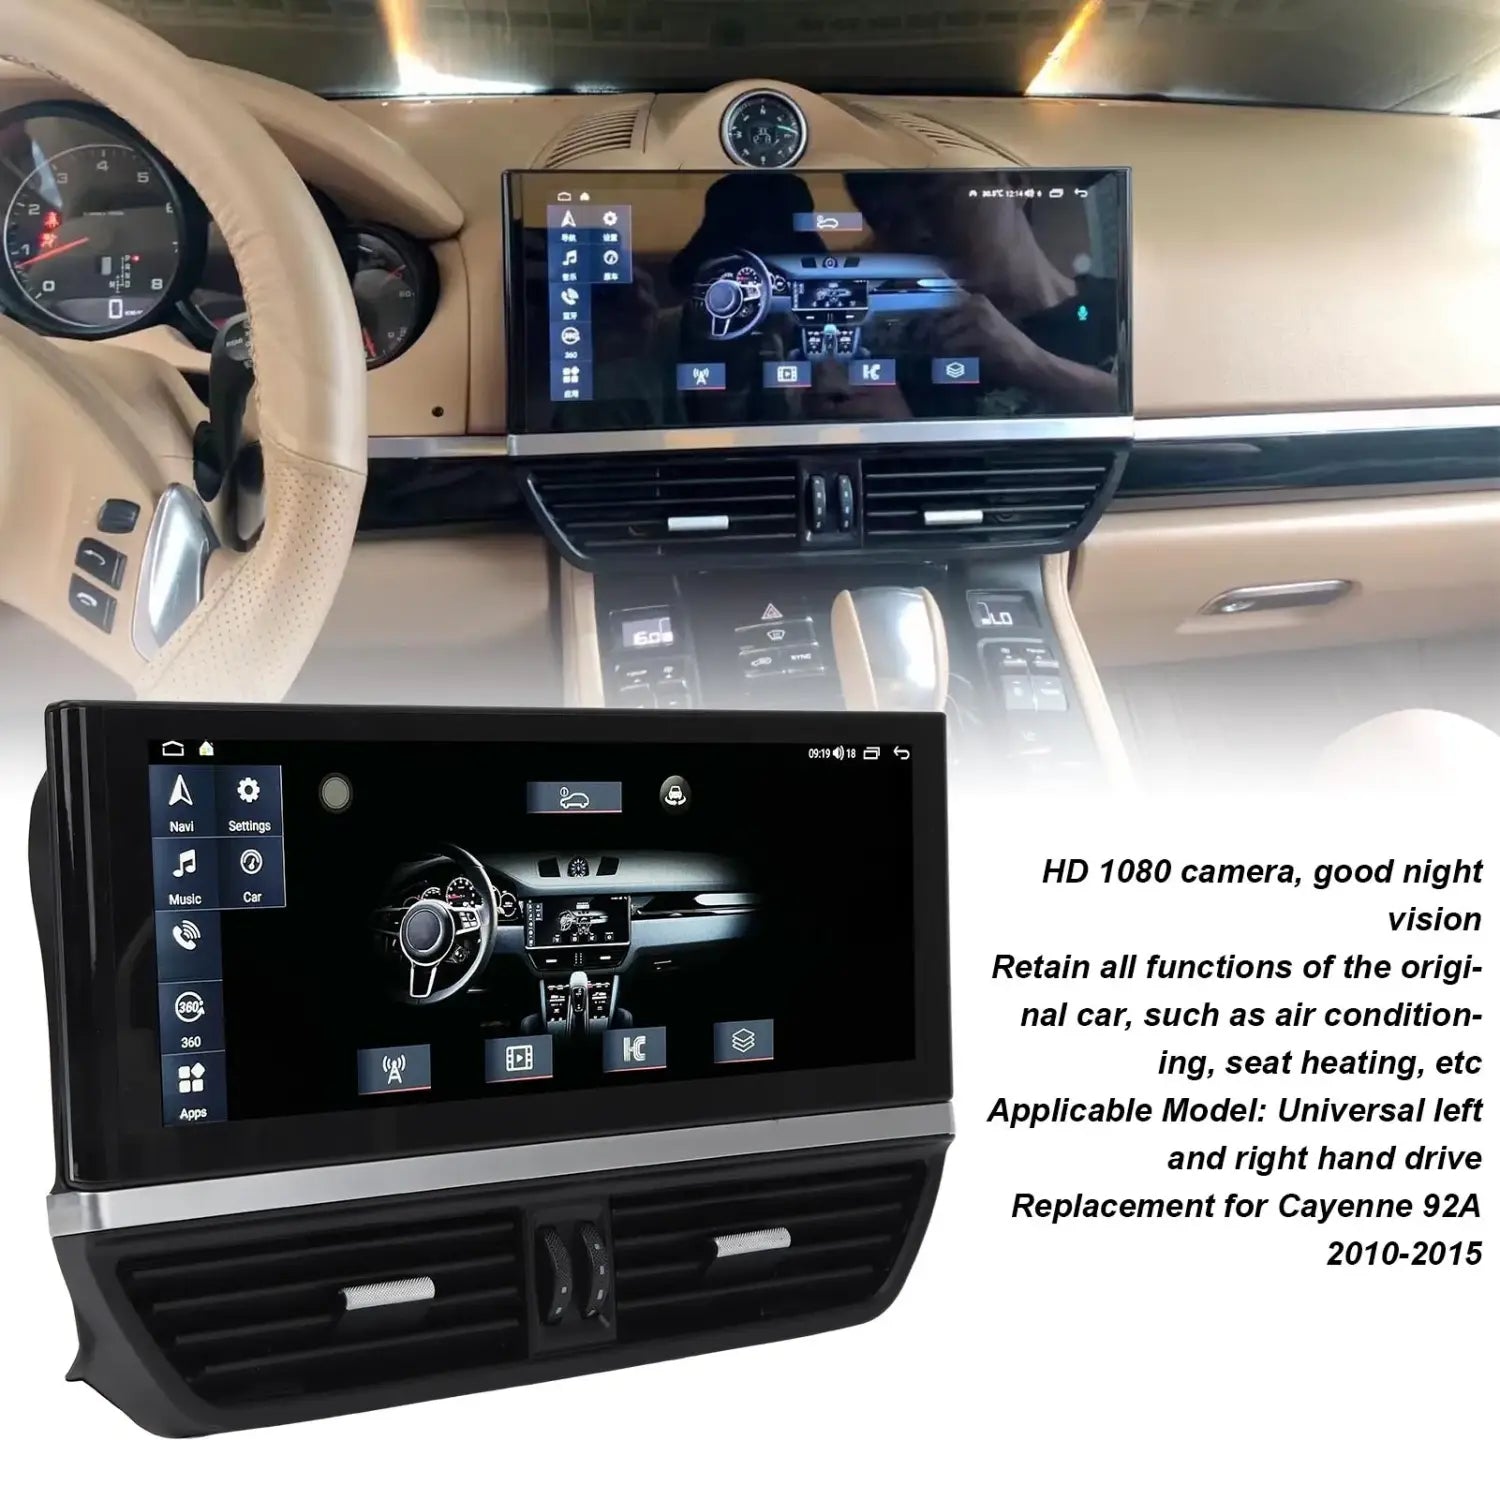 12.3In Car Multimedia Player Wireless Carplay HD Touch